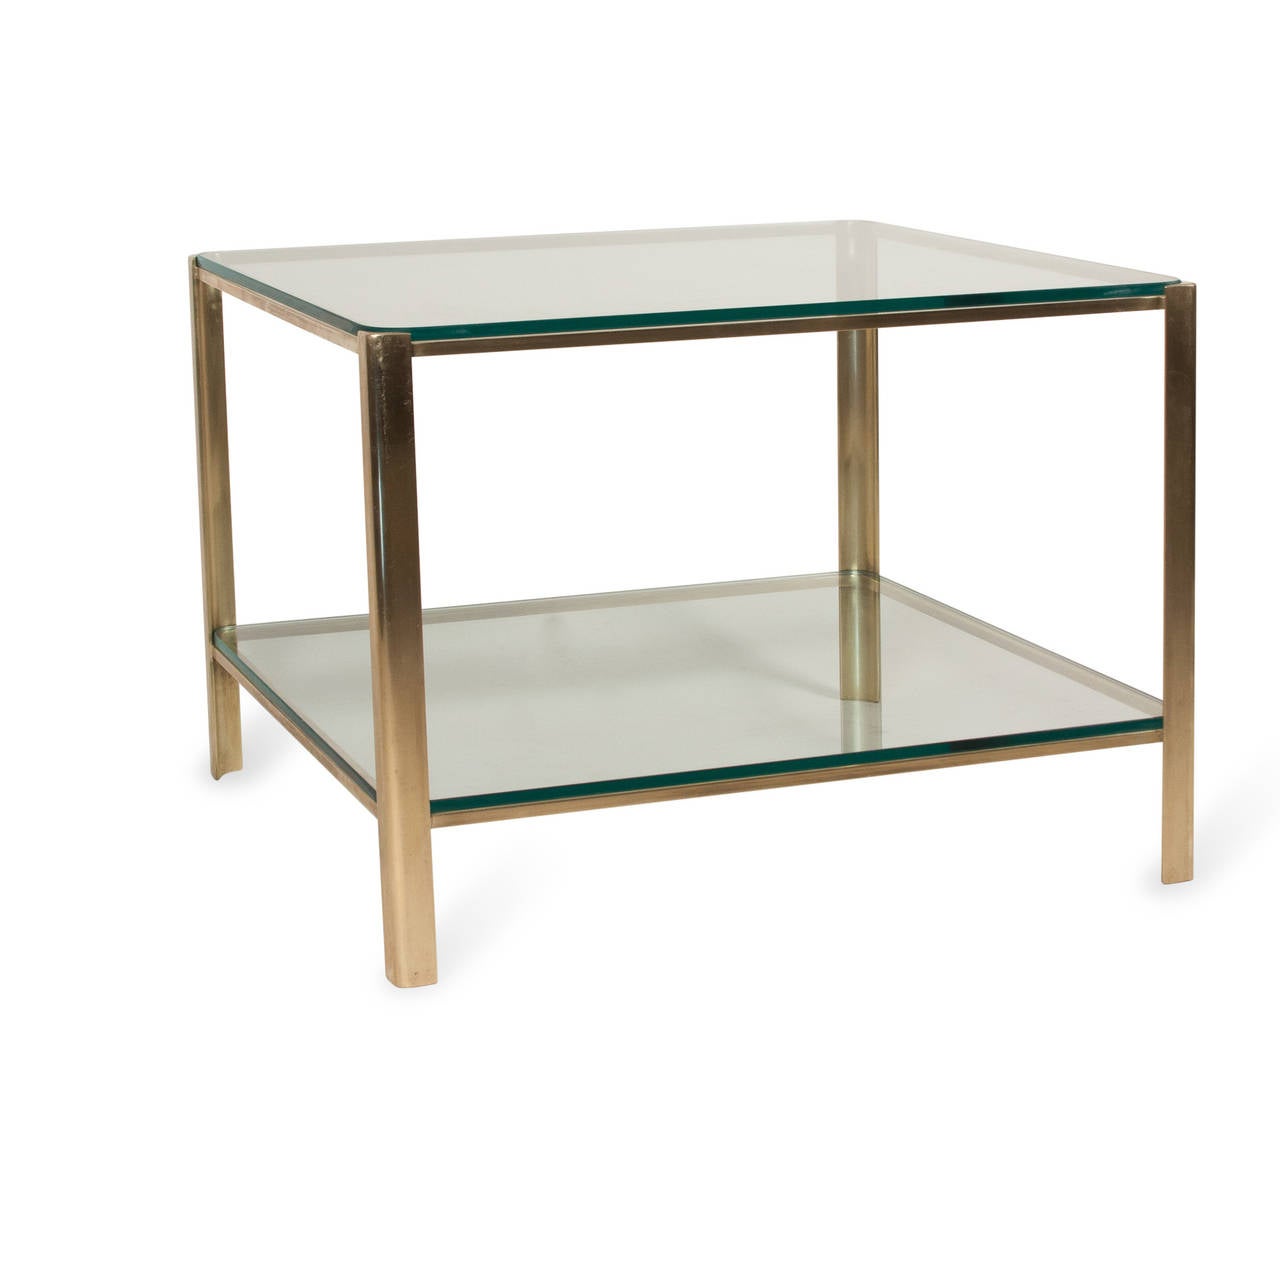 Brass frame square coffee table, glass top with rounded corners, lower glass shelf, by Maison Malabert. French, 1940s. Stamped markings to inside edge. Attributed to Jacques Quinet. 24 in square, height 17 in. (Item #2260)